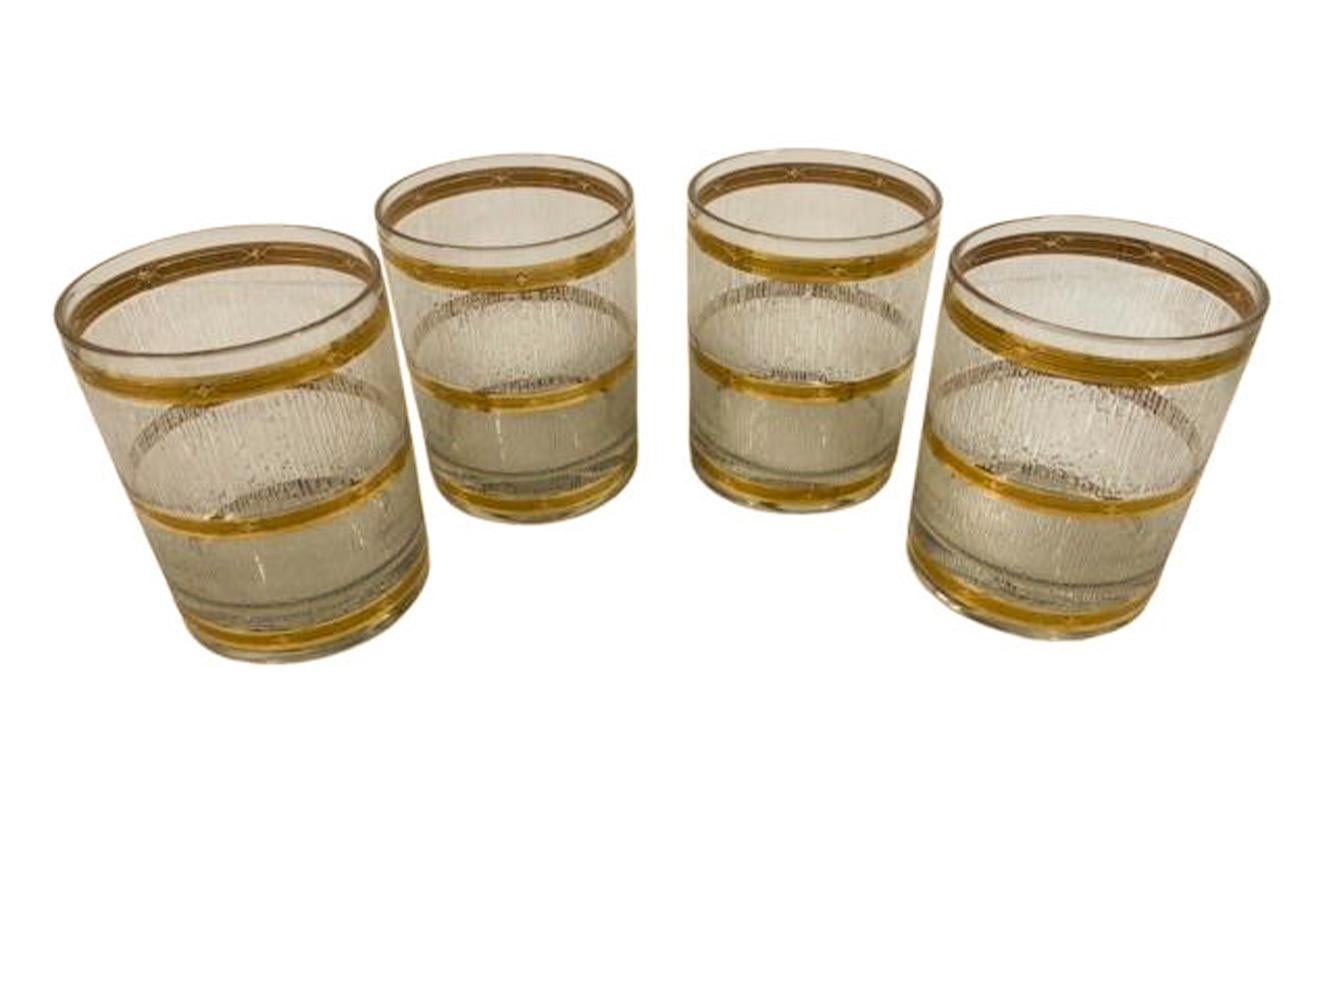 Set of 4 mid-century modern rocks glasses by Culver in the Icicle pattern with 2 wide bands of vertical frosted clear textured enamel between three 22 karat gold bands. The textured finish creates a non-slip and optical surface.